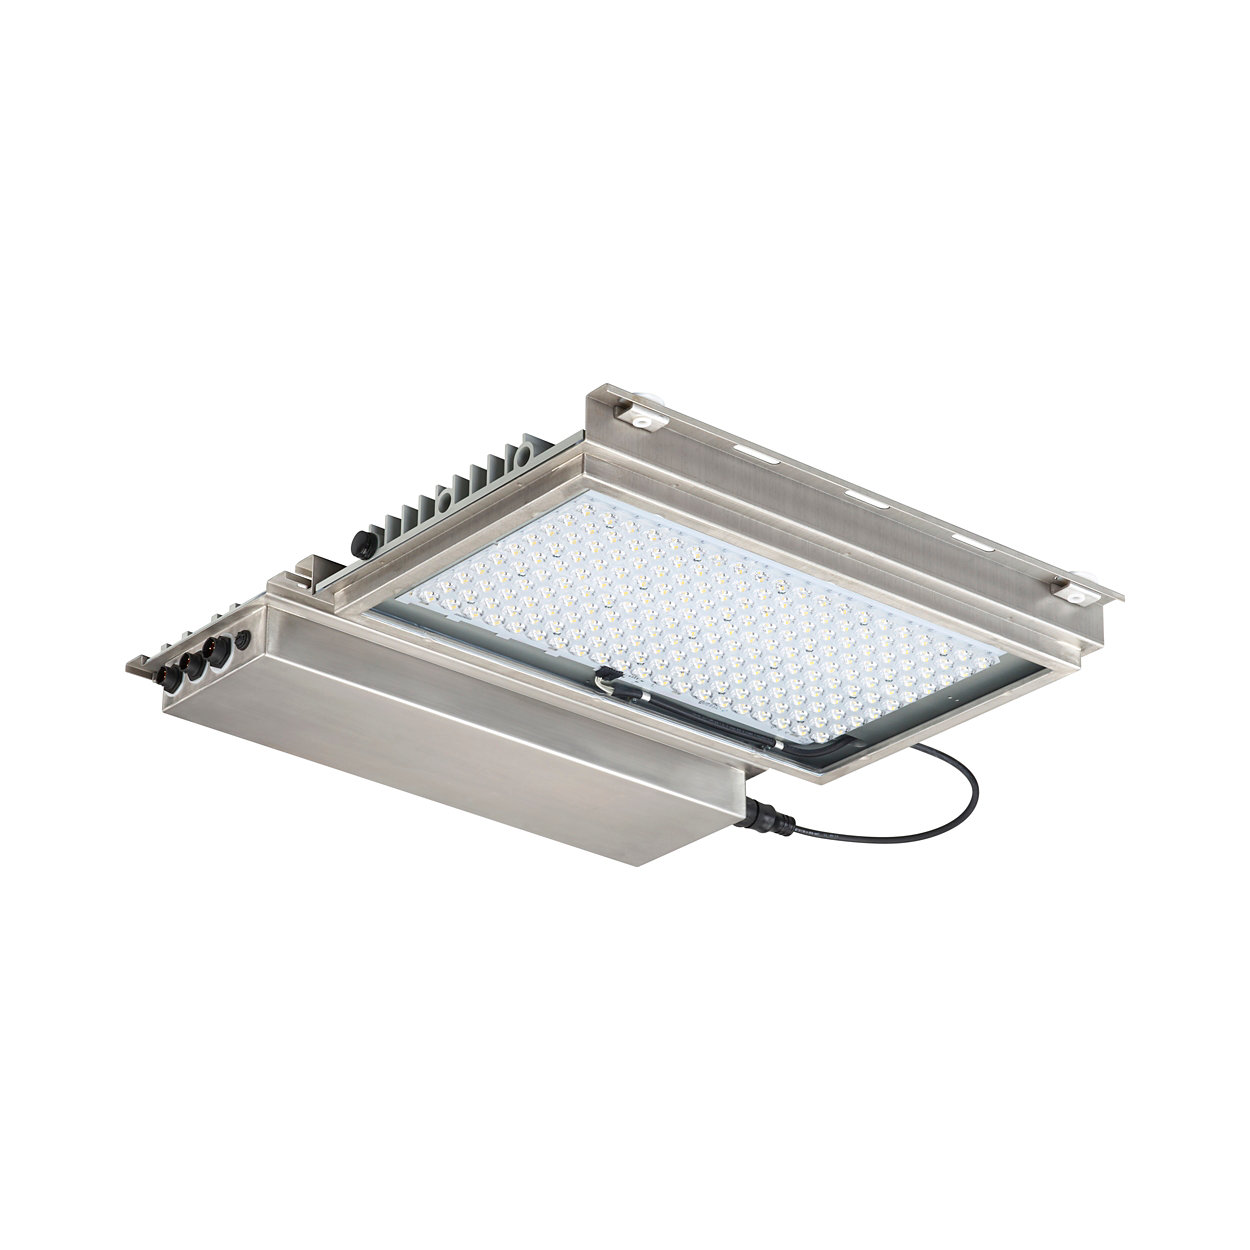 FlowStar – LED tunnel entrance and point-source interior lighting